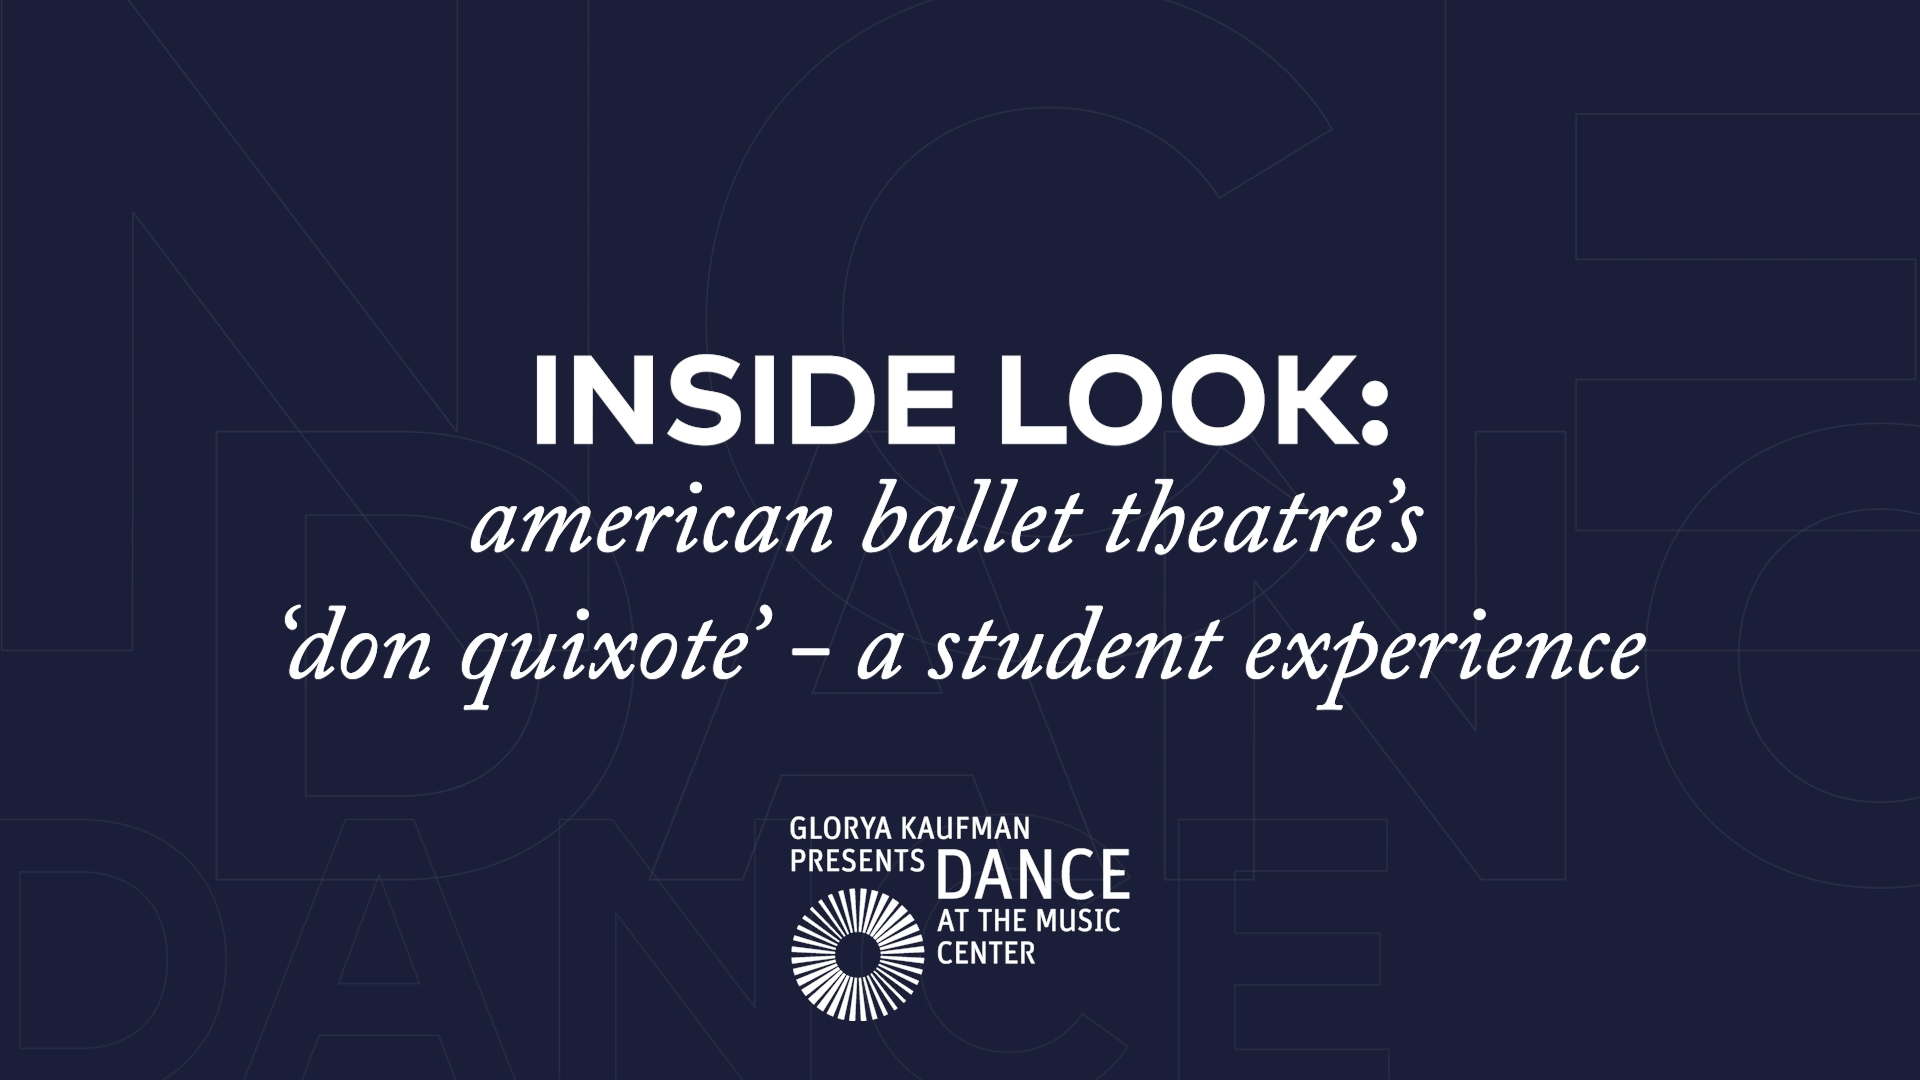 INSIDE LOOK: American Ballet Theatre's 'Don Quixote'--A Student Experience